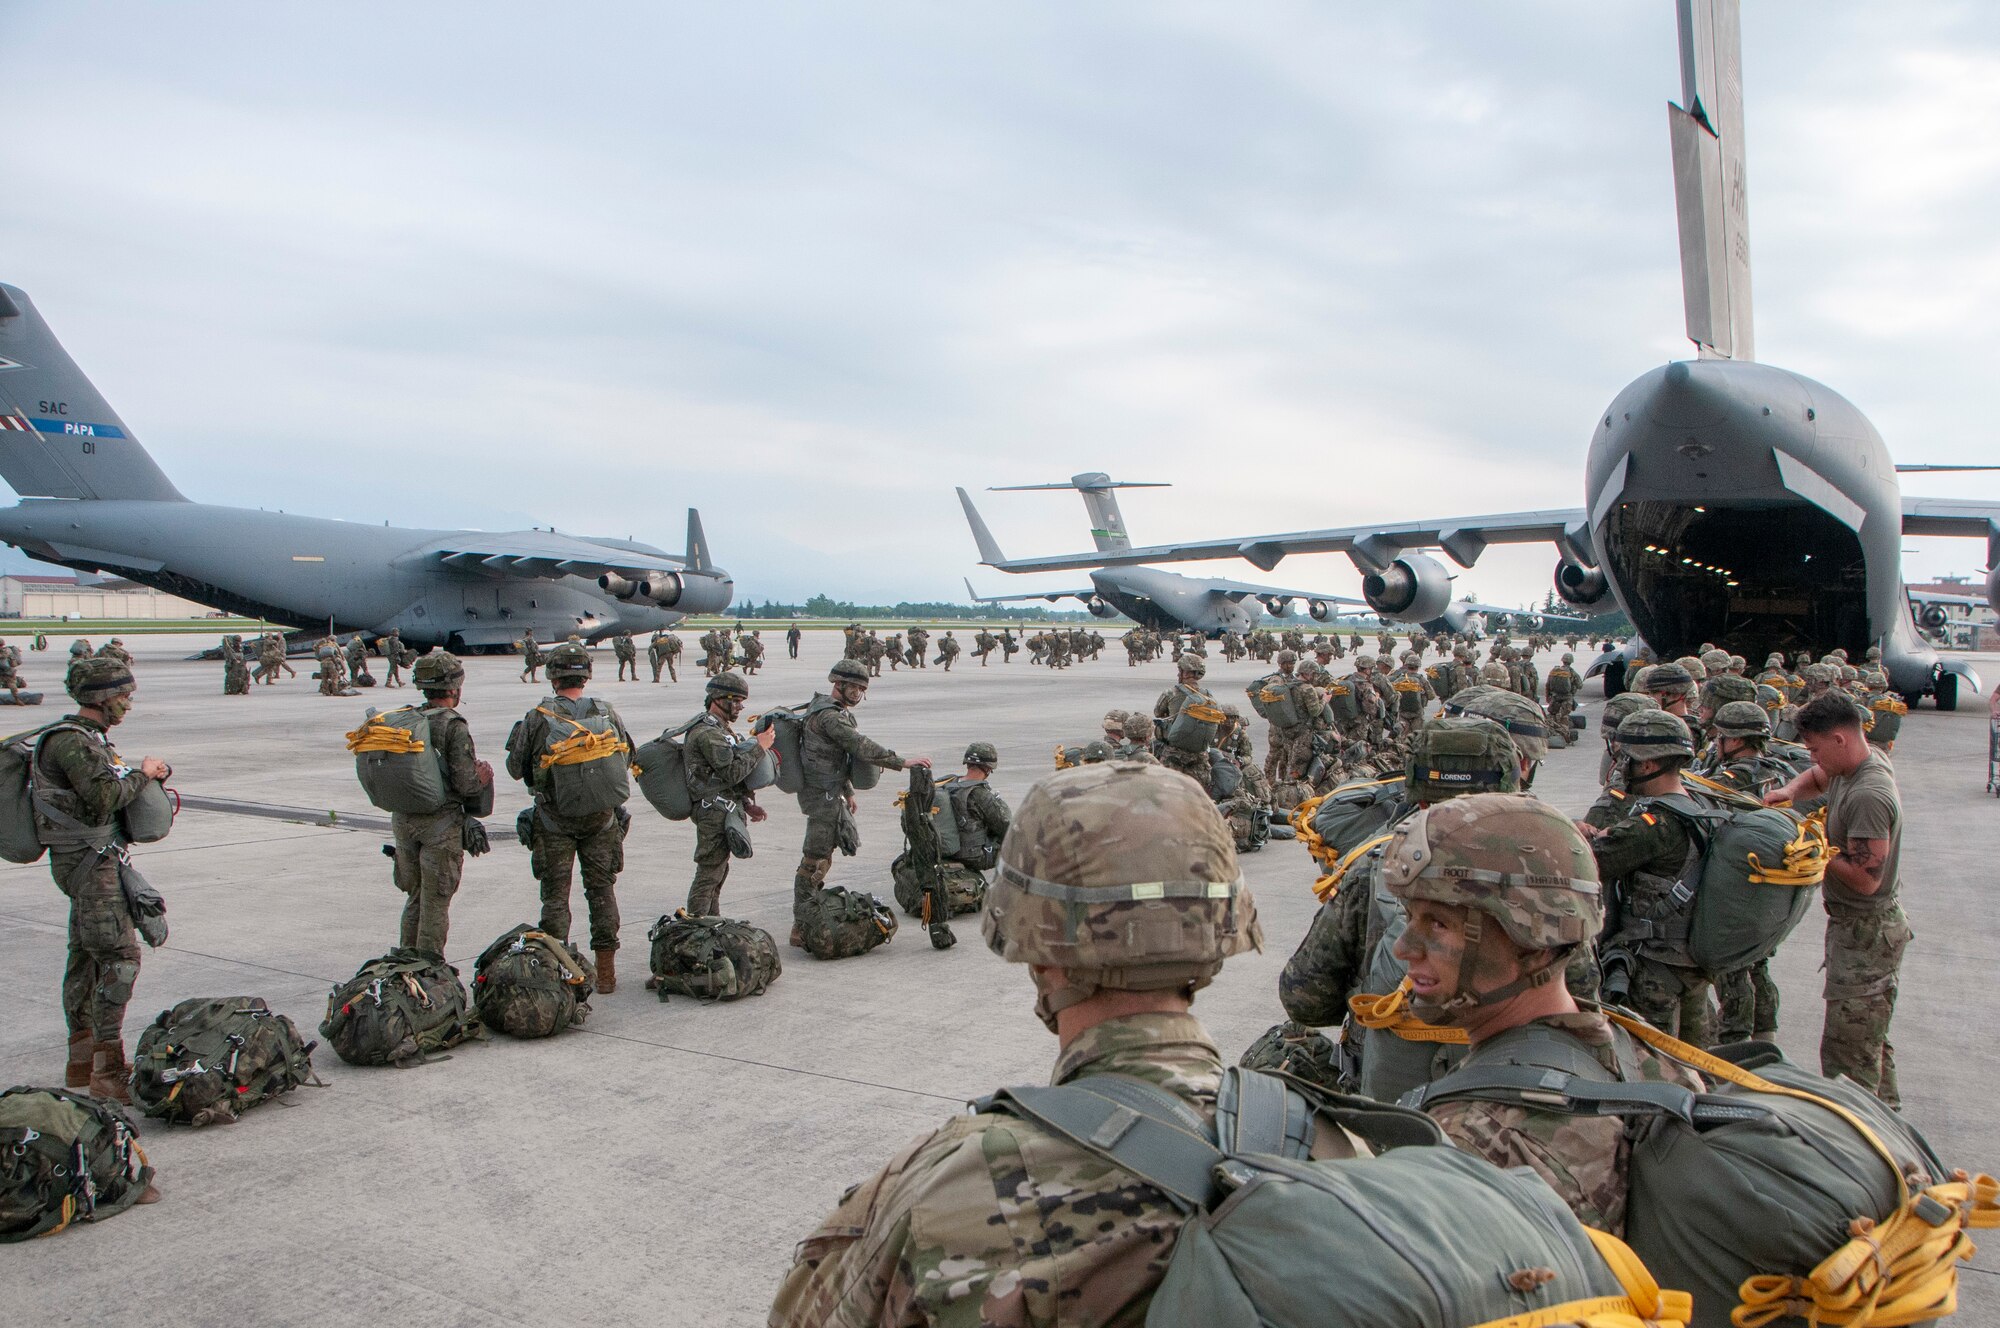 Members of the U.S. Army 1st Battalion, 503rd Infantry Regiment, 173rd Airborne Brigade and Spanish Army Airborne Brigade prepare to board a C-17 Globemaster III during exercise Bayonet Strike June 12, 2018, at Aviano Air Base, Italy.